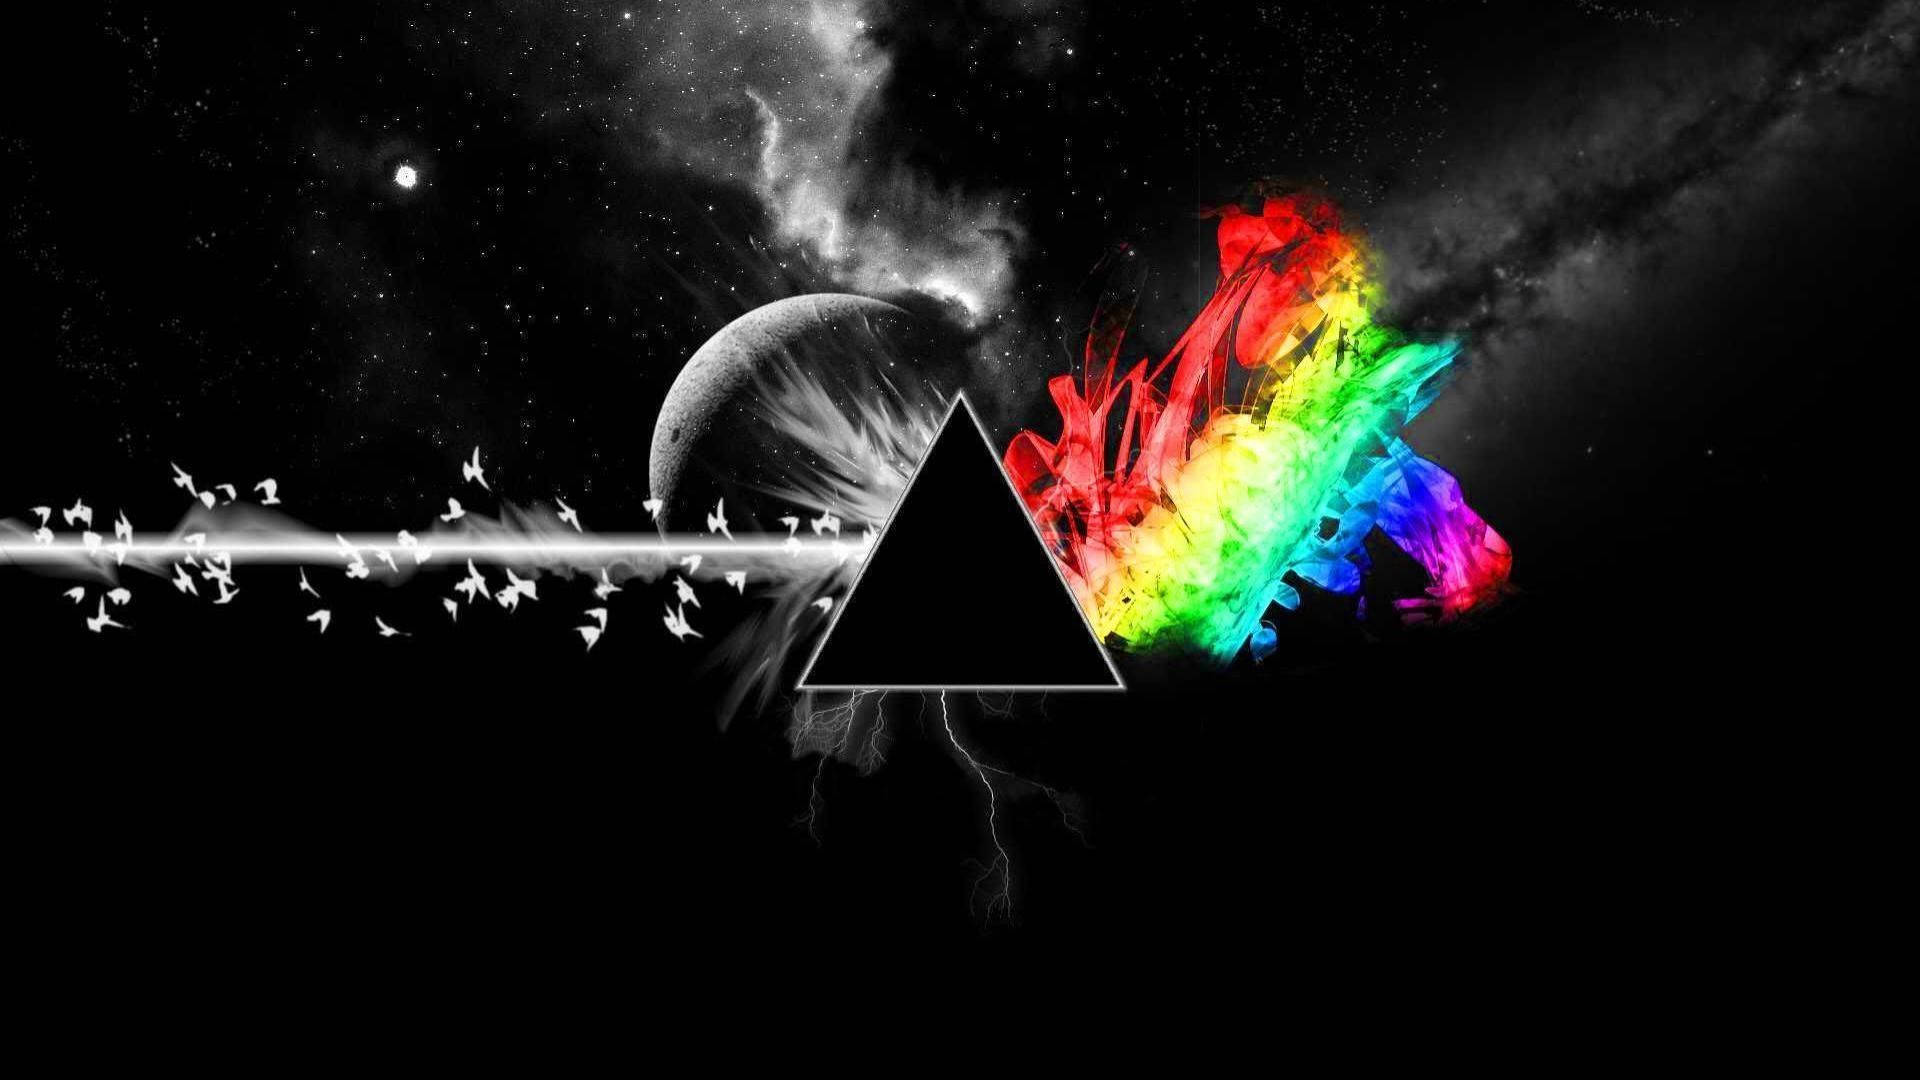 Black Triangle Prism In Space